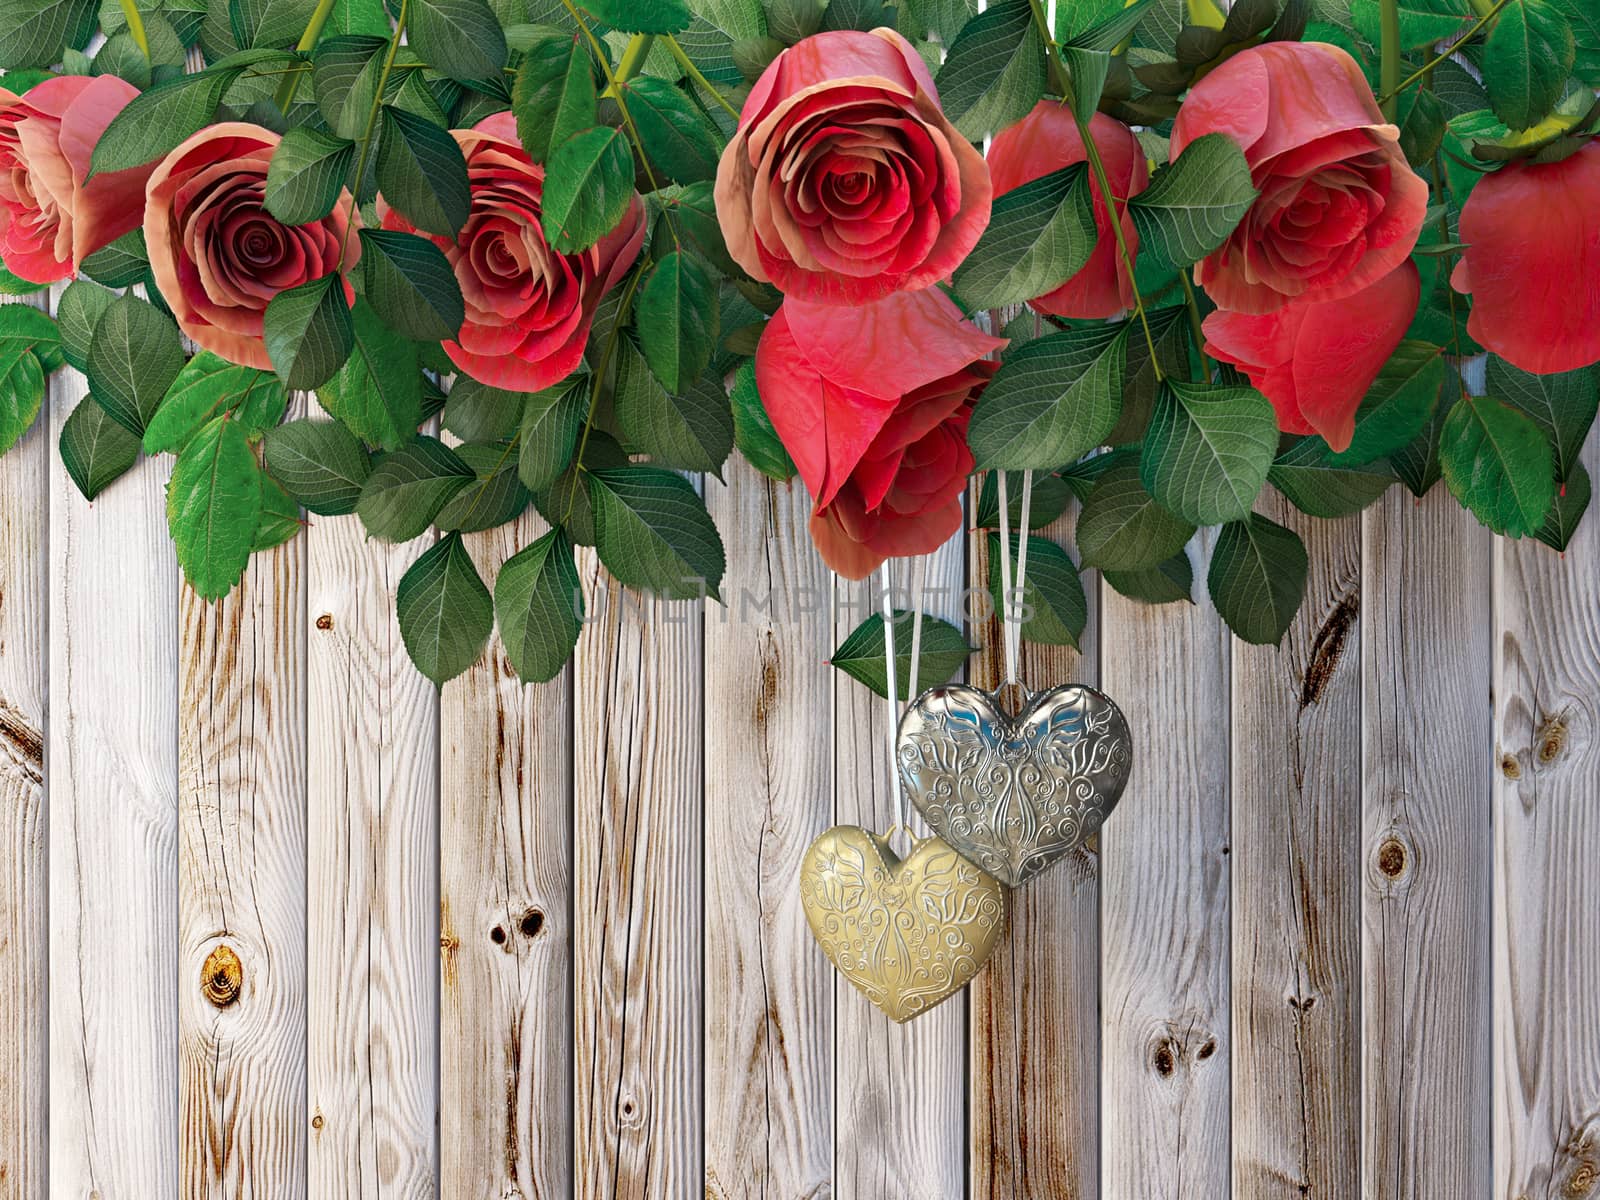 Roses and a hearts on wooden board, Valentines Day background, wedding day holiday background by denisgo